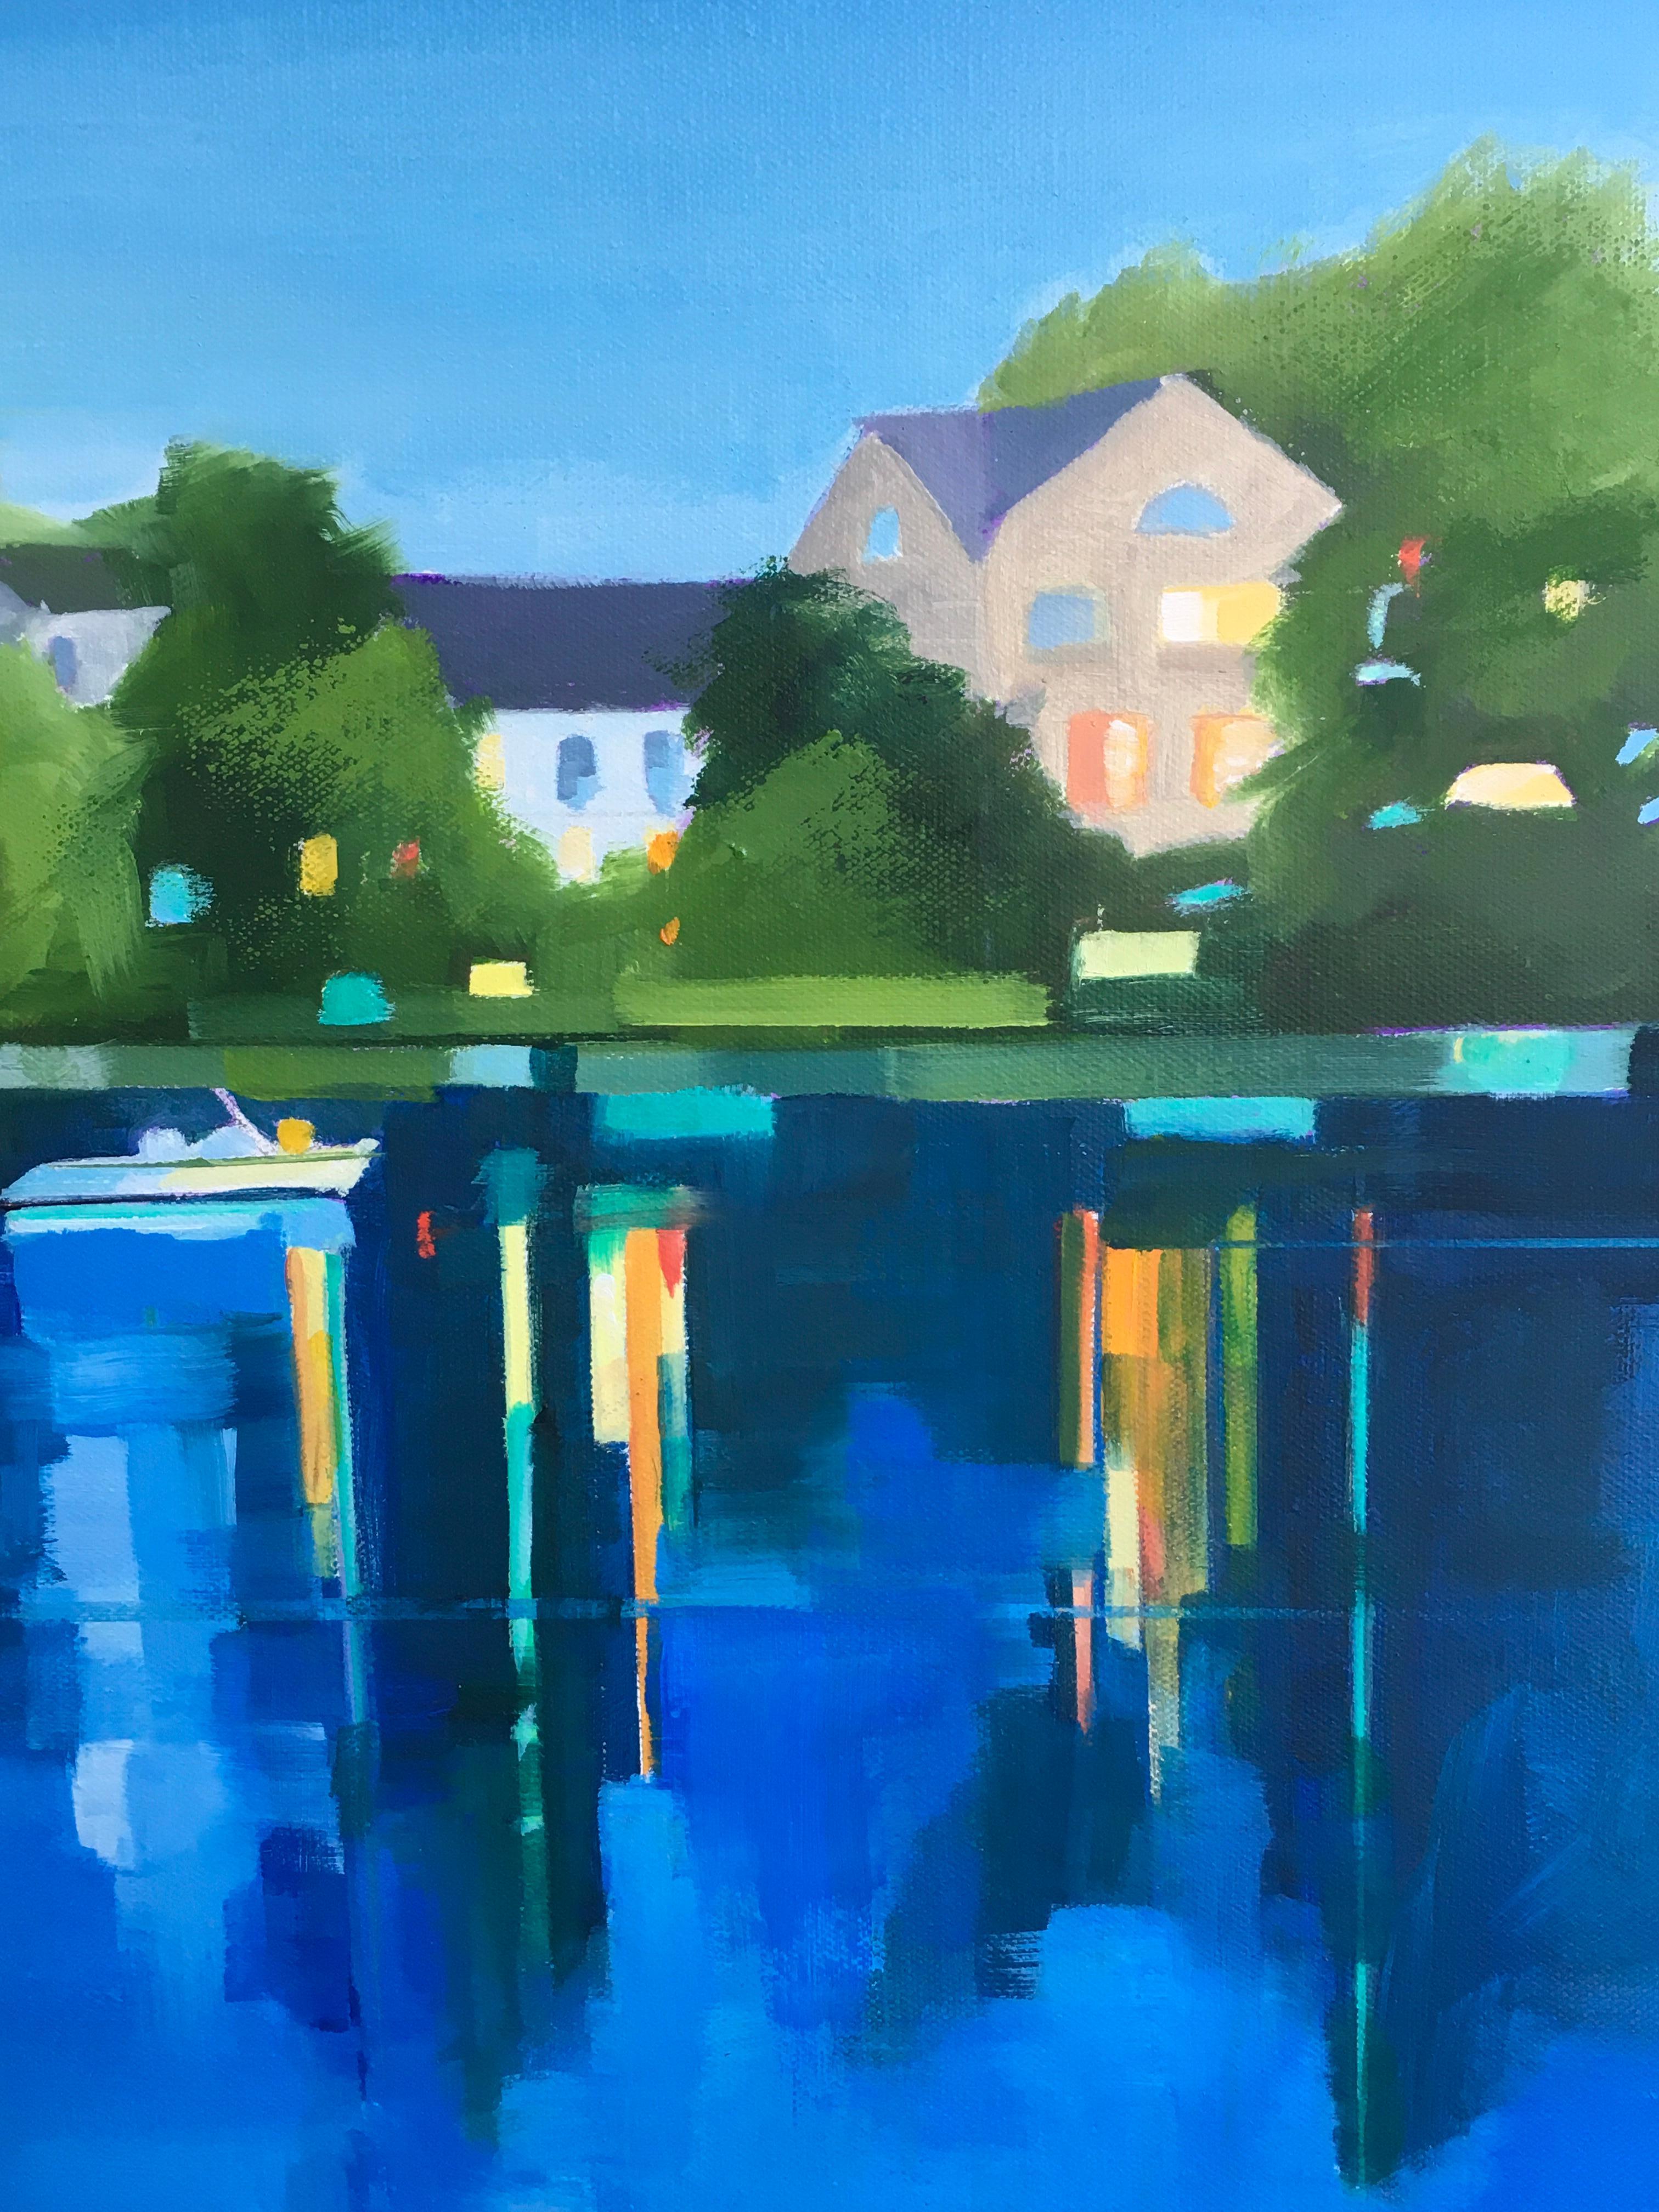 Summer Bluff by Betty Ball is part of her Land and Sea series.  It is Oil on Canvas, 30x30.  It is $2,450.  It is a beautiful landscape and waterscape filled with light, water and grassy landscapes.

Betty Ball received her BFA from the Rhode Island